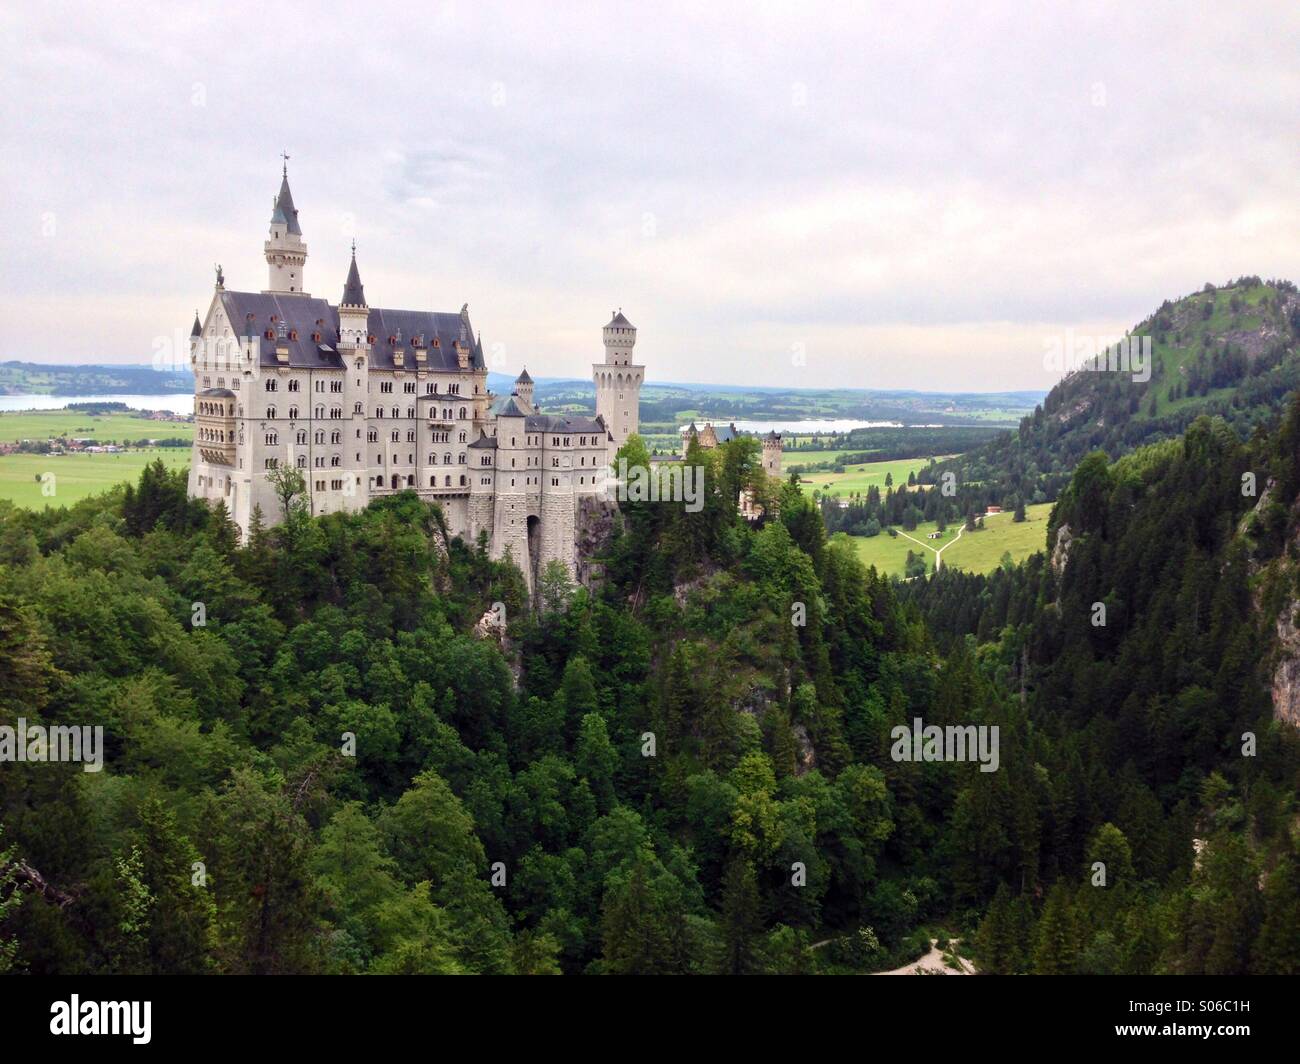 Neuschwanstein (New Swanstone) Castle was built by Ludwig II during the 19th century.  Walt Disney used the Castle as inspiration for Sleeping Beauty Castles at Disney Parks around the world. Stock Photo